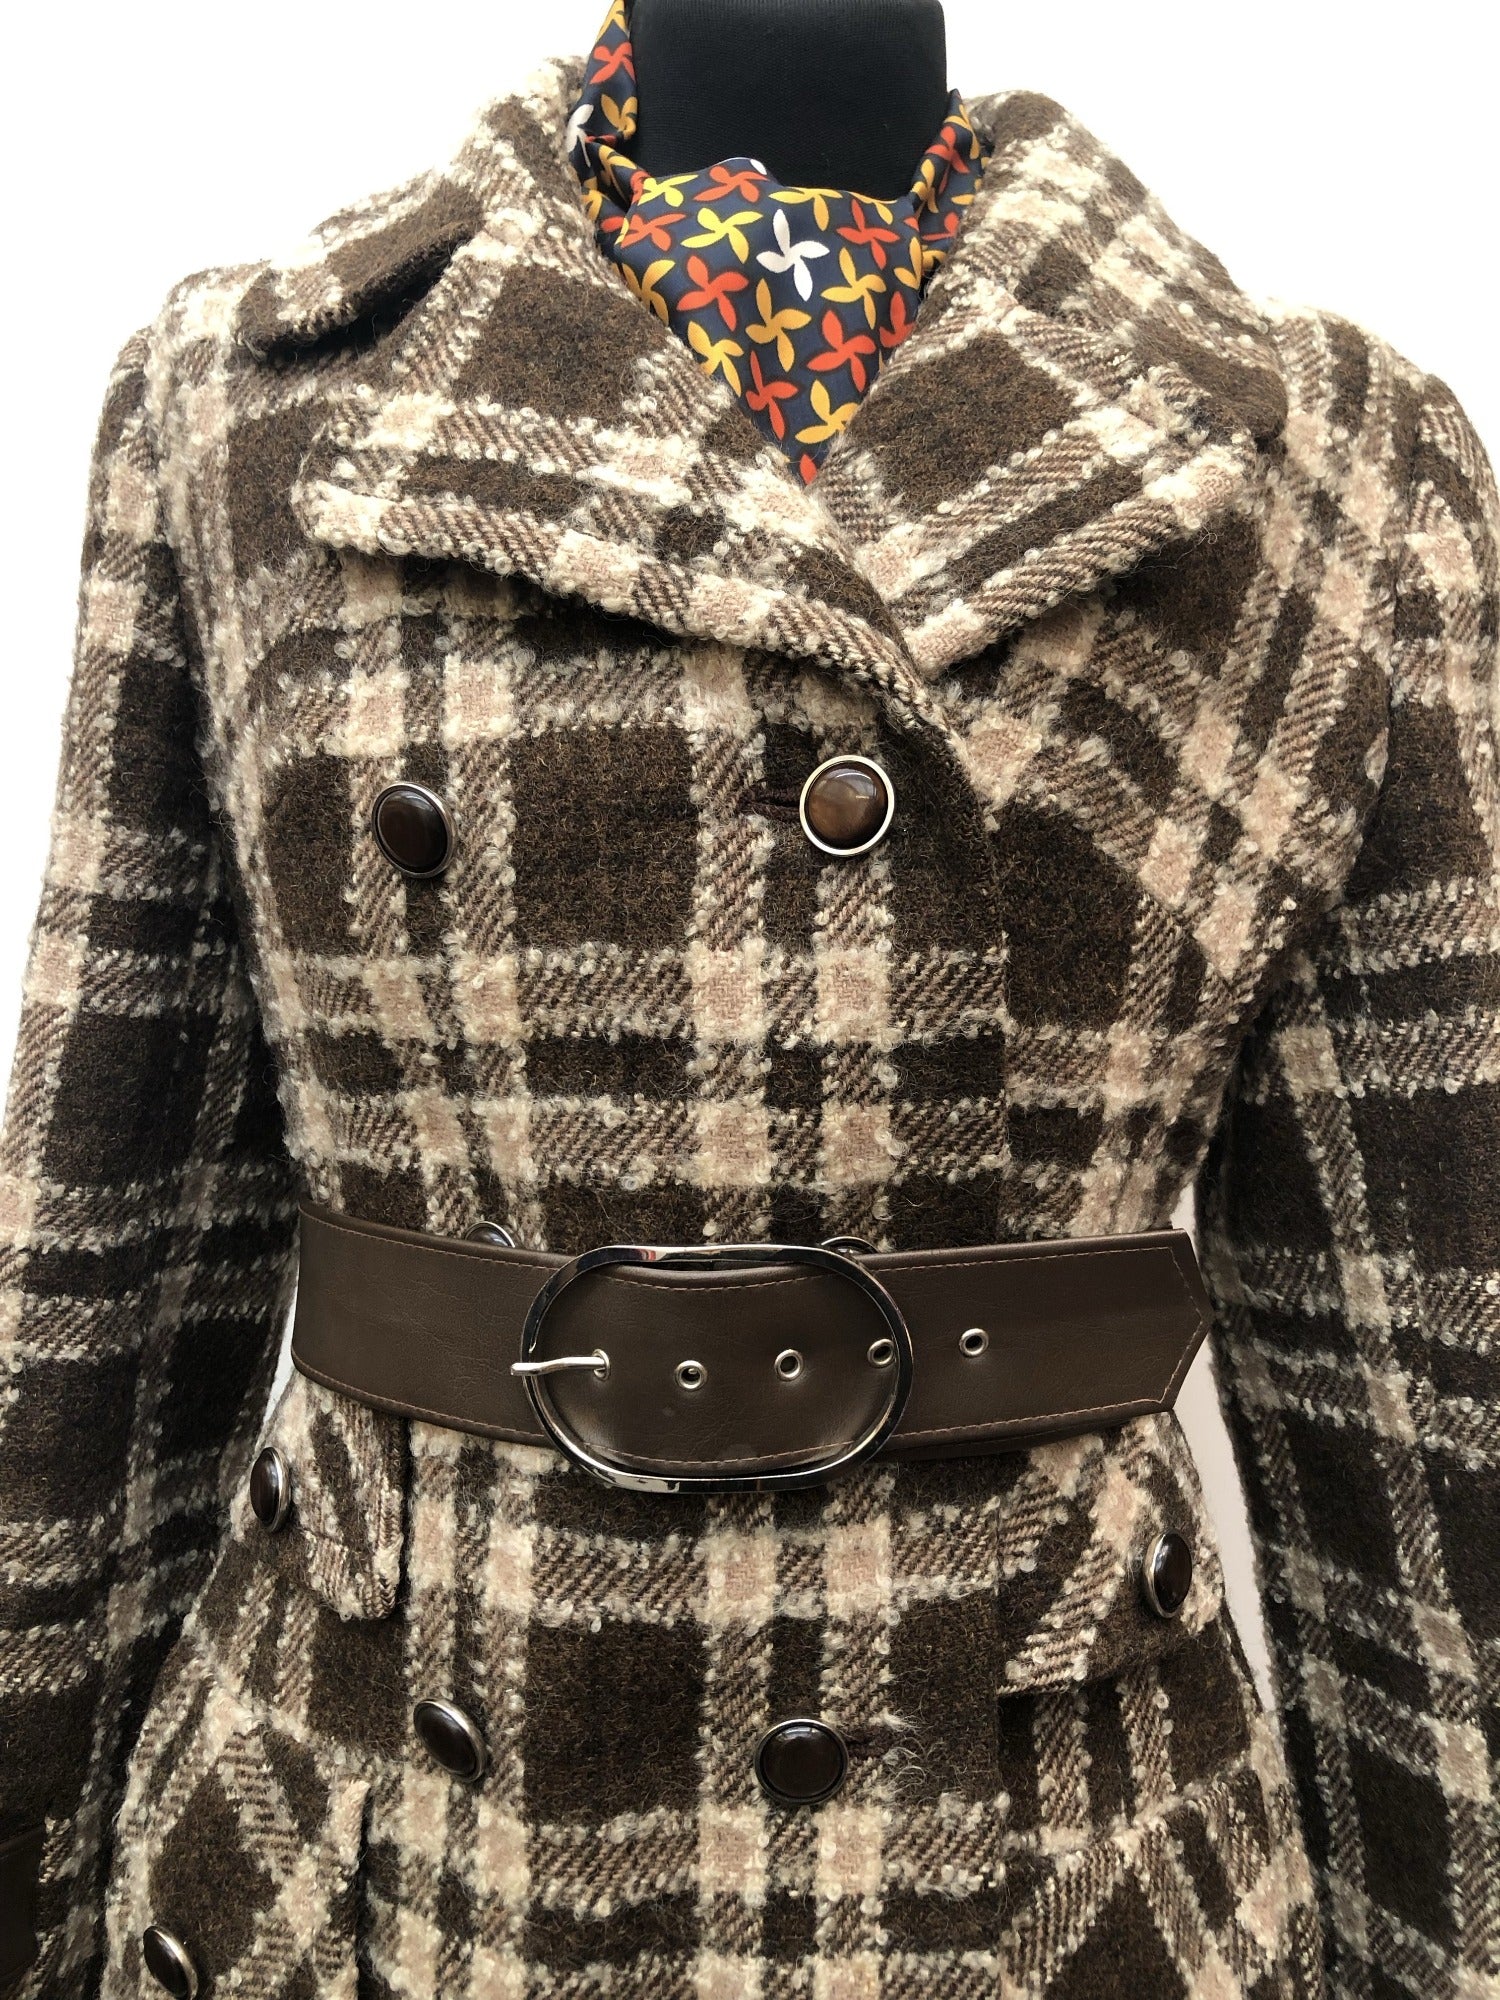 womens  waist belt  vintage  Flagship Model  fitted waist  double breasted  decorative pockets  checked  check coat  brown  Belted waist  70s  1970s  10